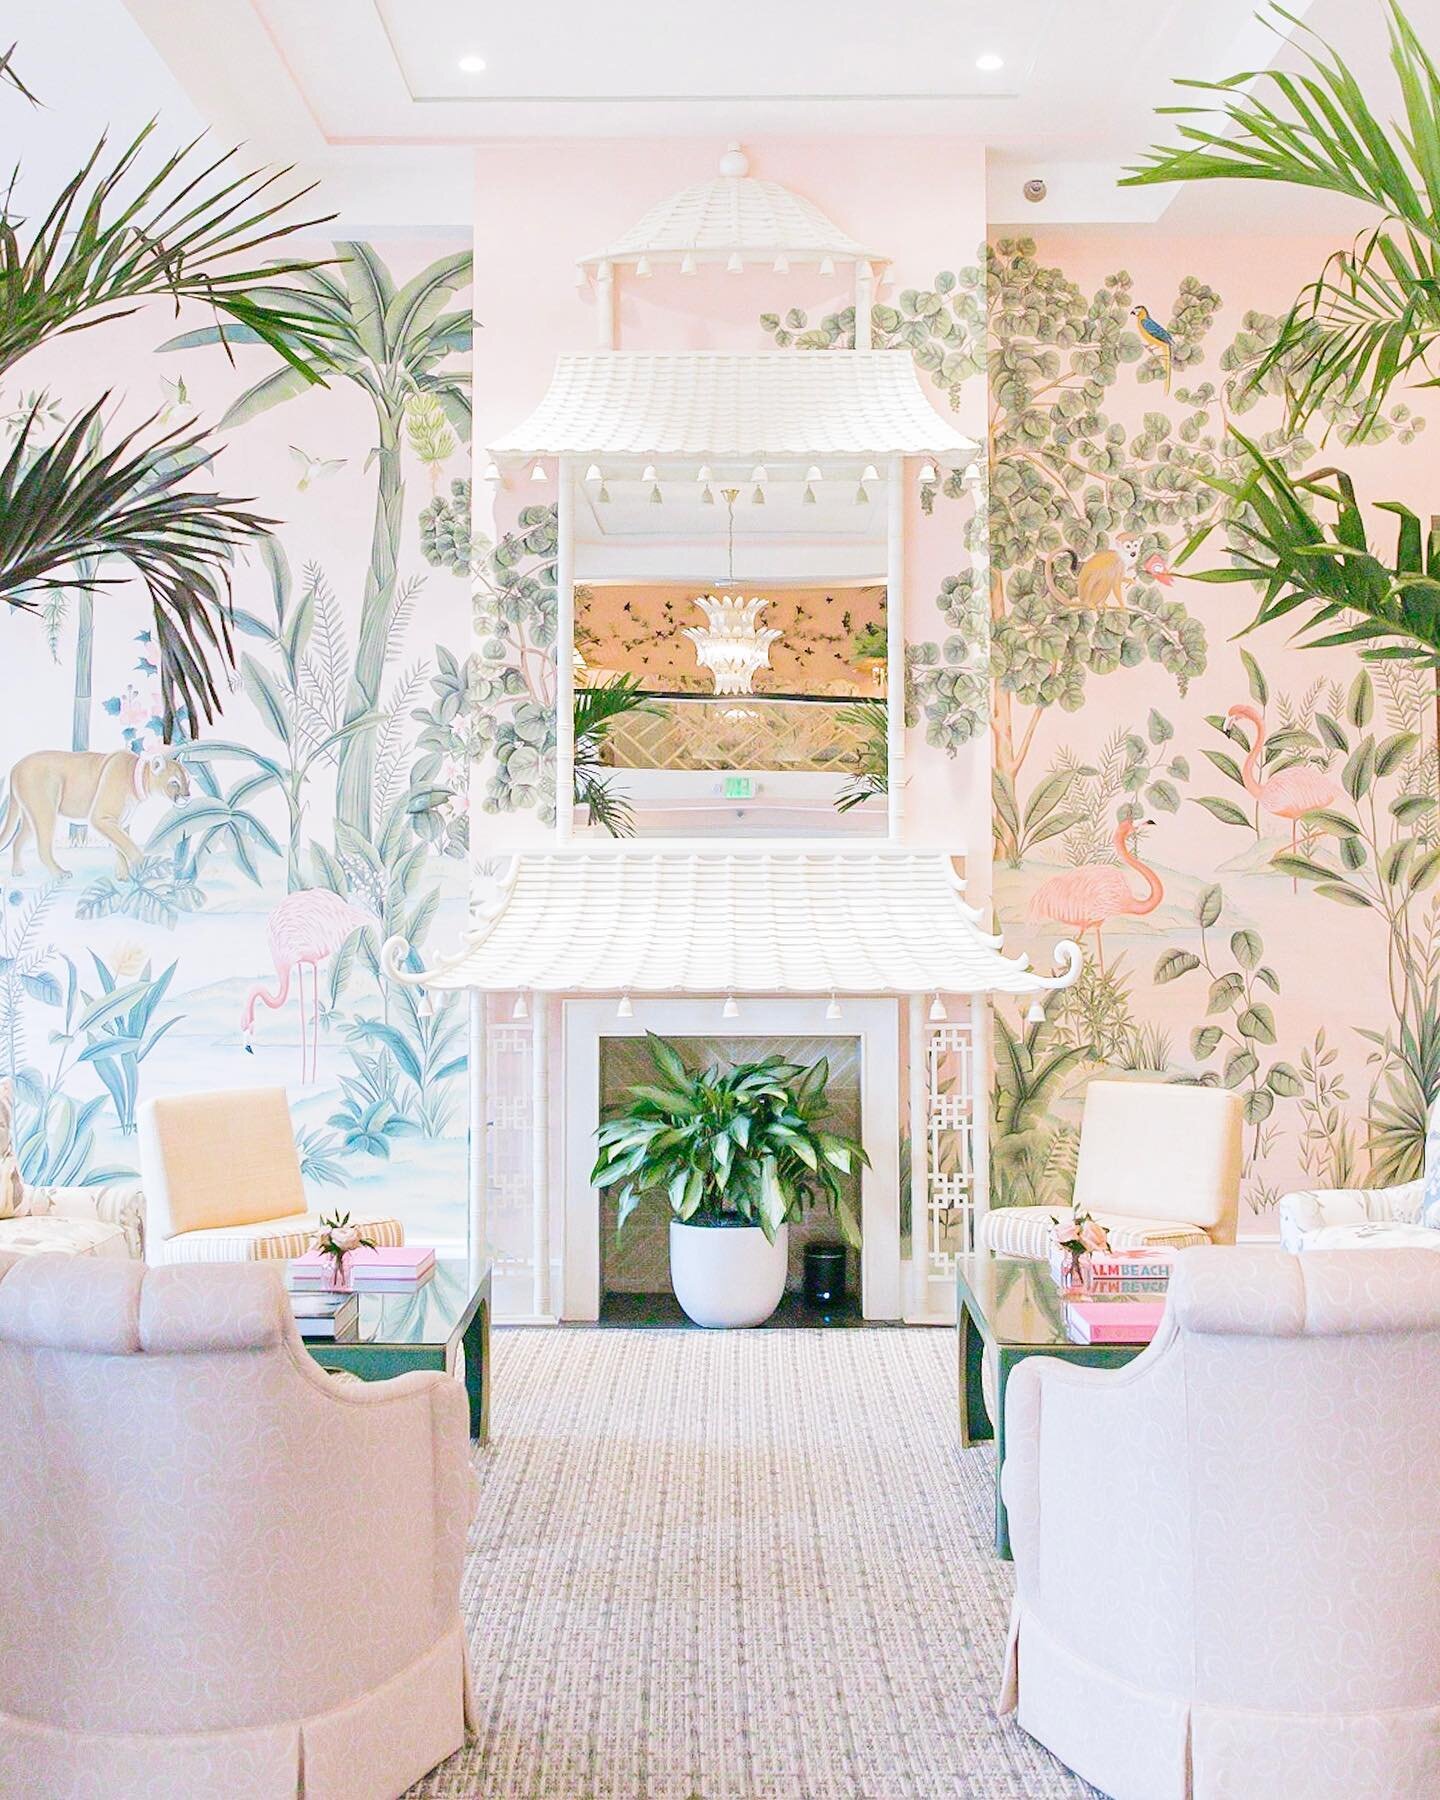 pink paradise @thecolonypalmbeach 🌸 the @degournay wallpaper, the fresh palms, and the abundance of PINK brings this iconic space to life and always puts a smile on my face 💕